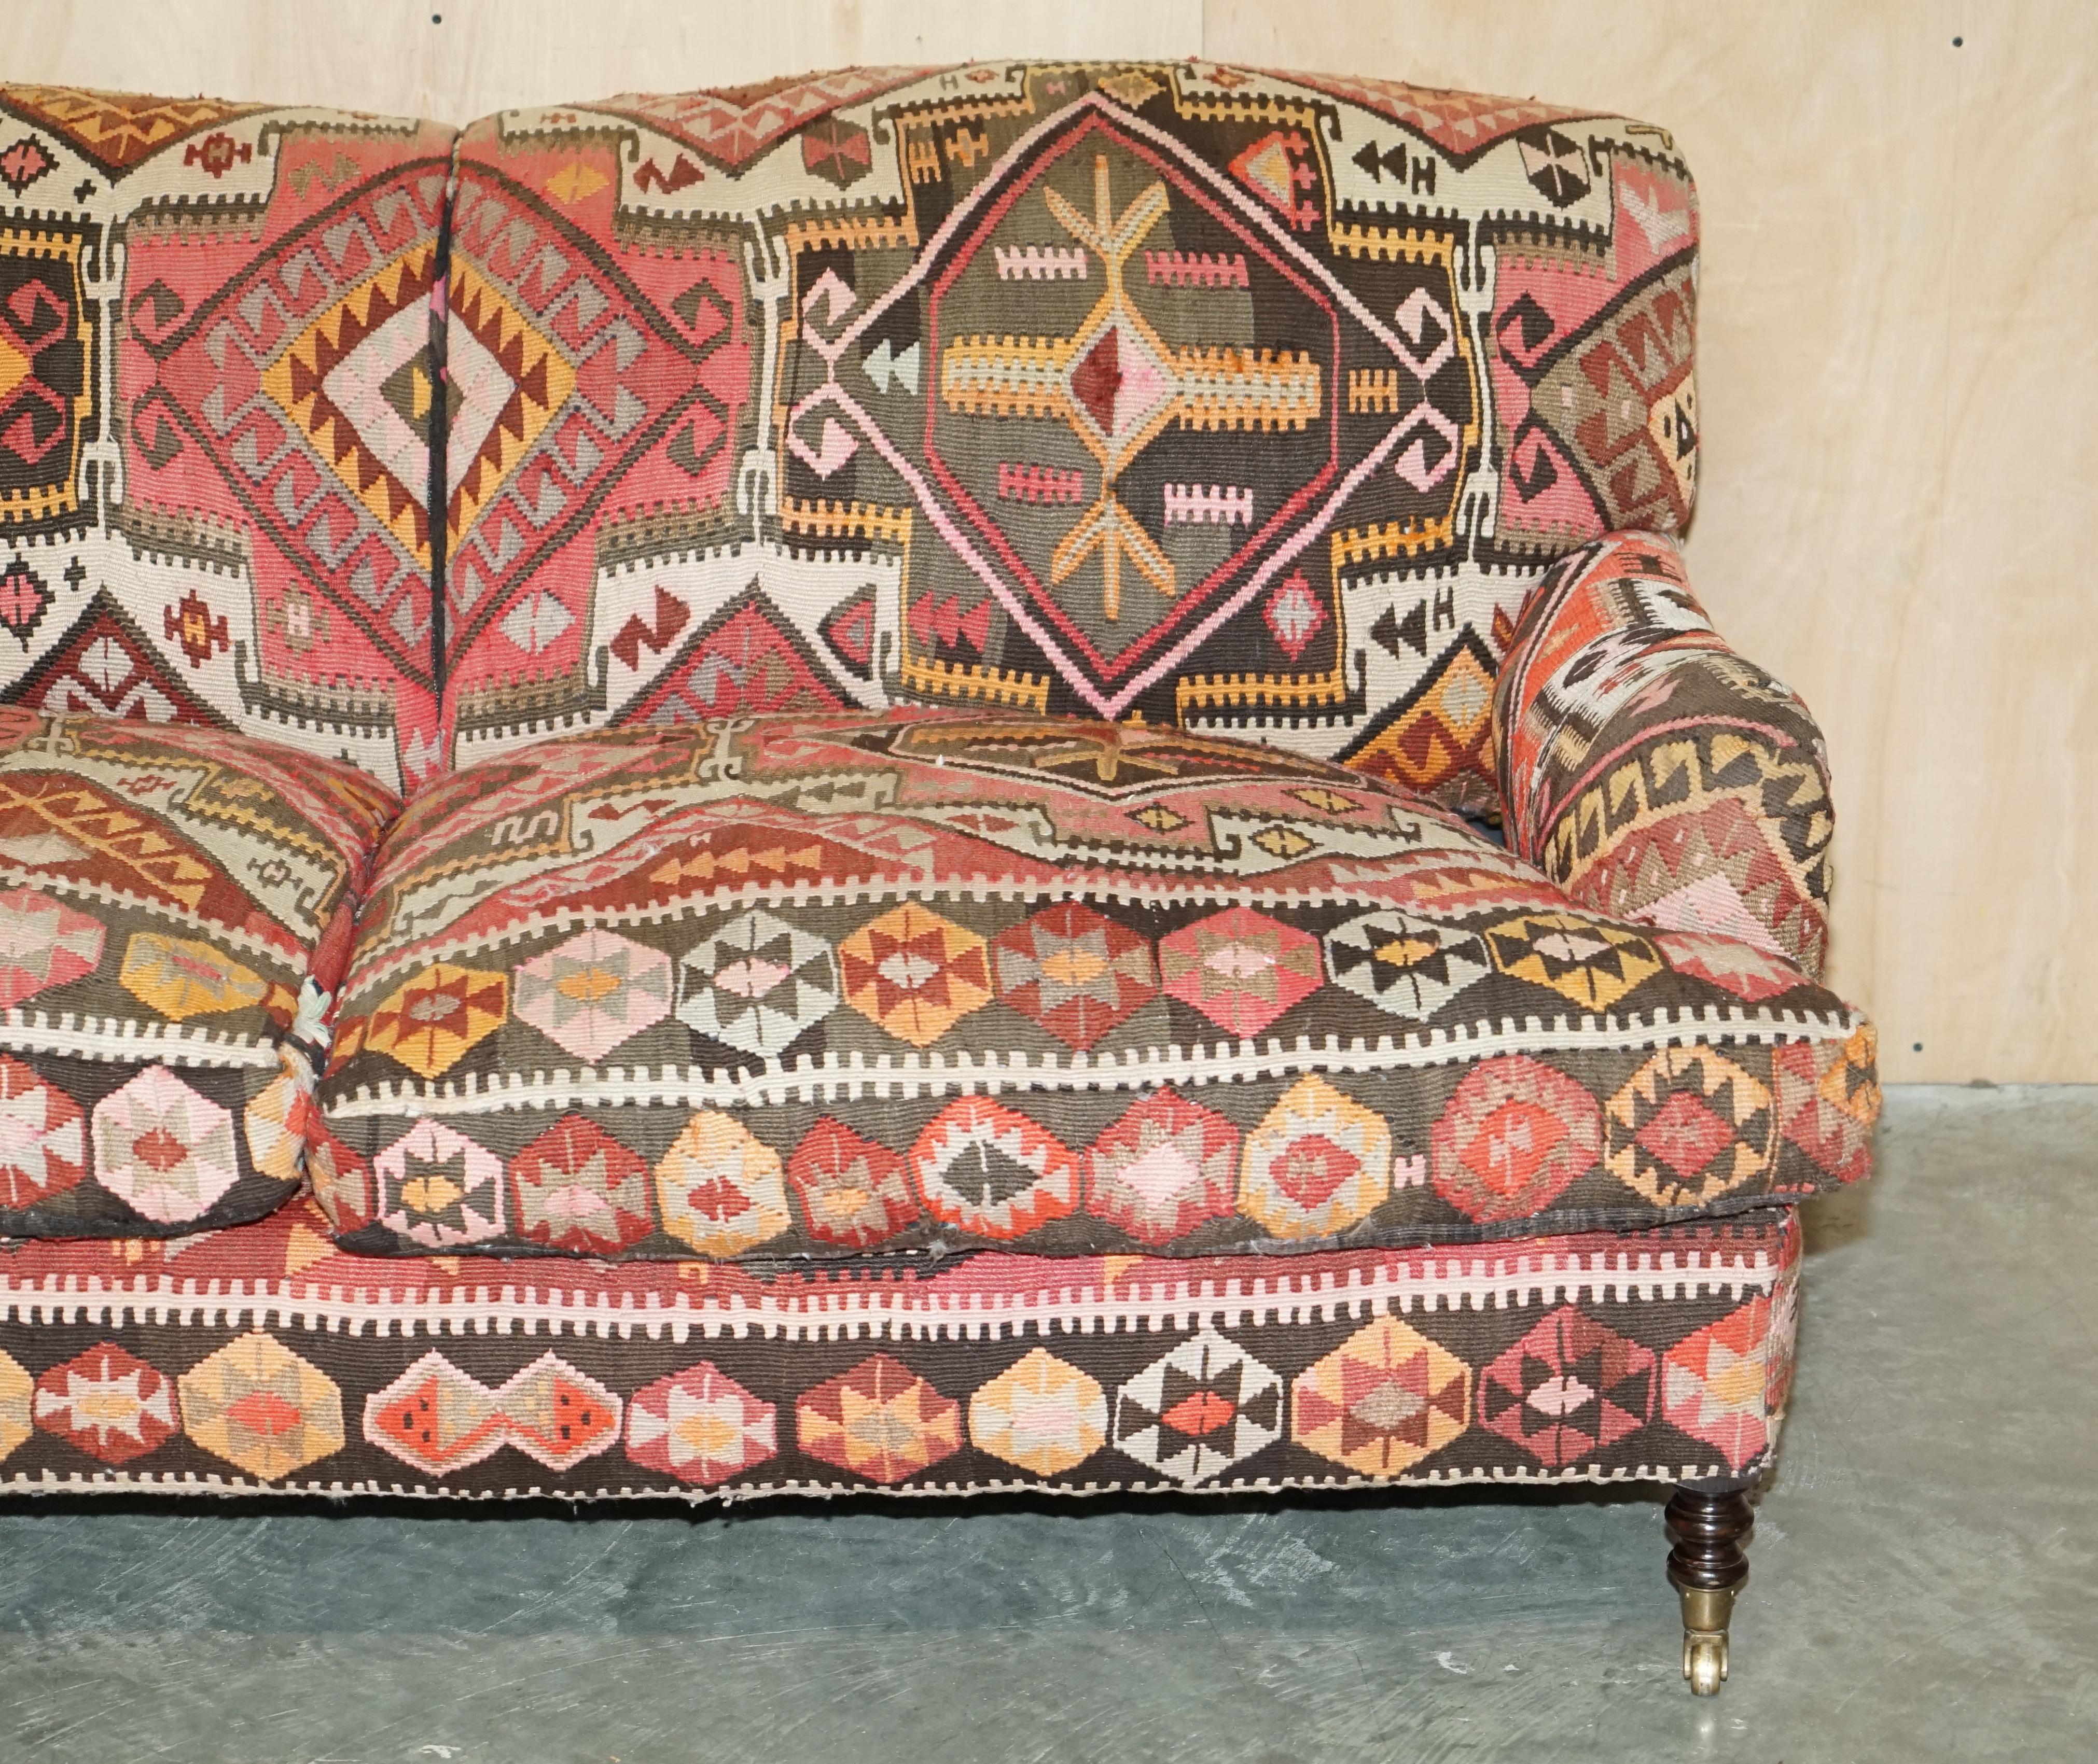 Hand-Crafted STUNNING ViNTAGE GEORGE SMITH KILIM UPHOLSTERED HOWARD & SON'S STYLE SOFA